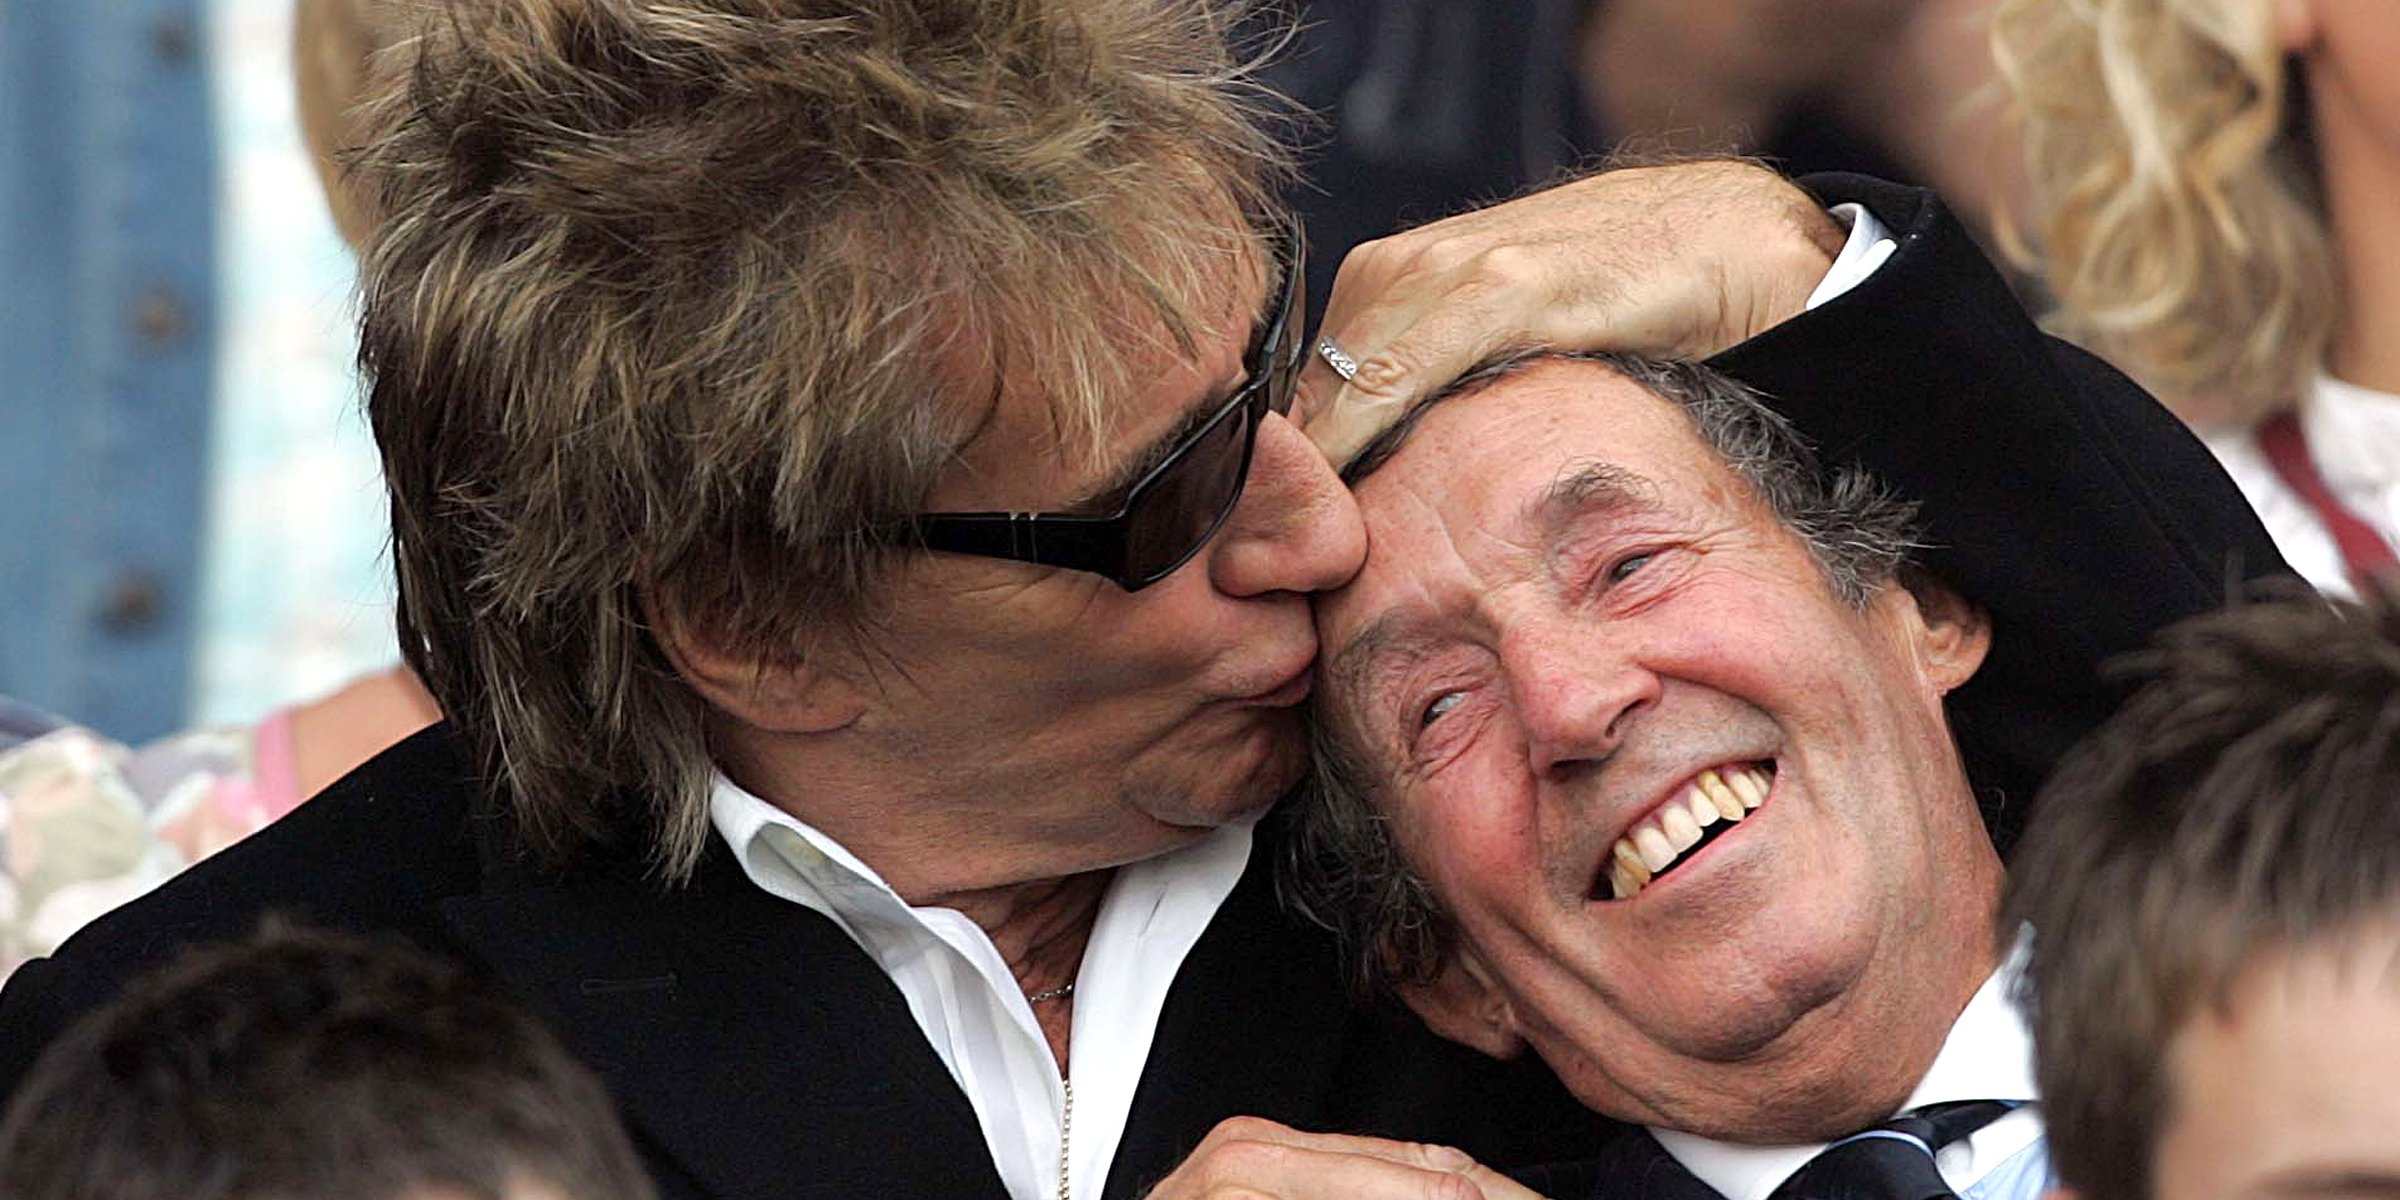 Rod Stewart and His Brother, 2007 | Source: Getty Images